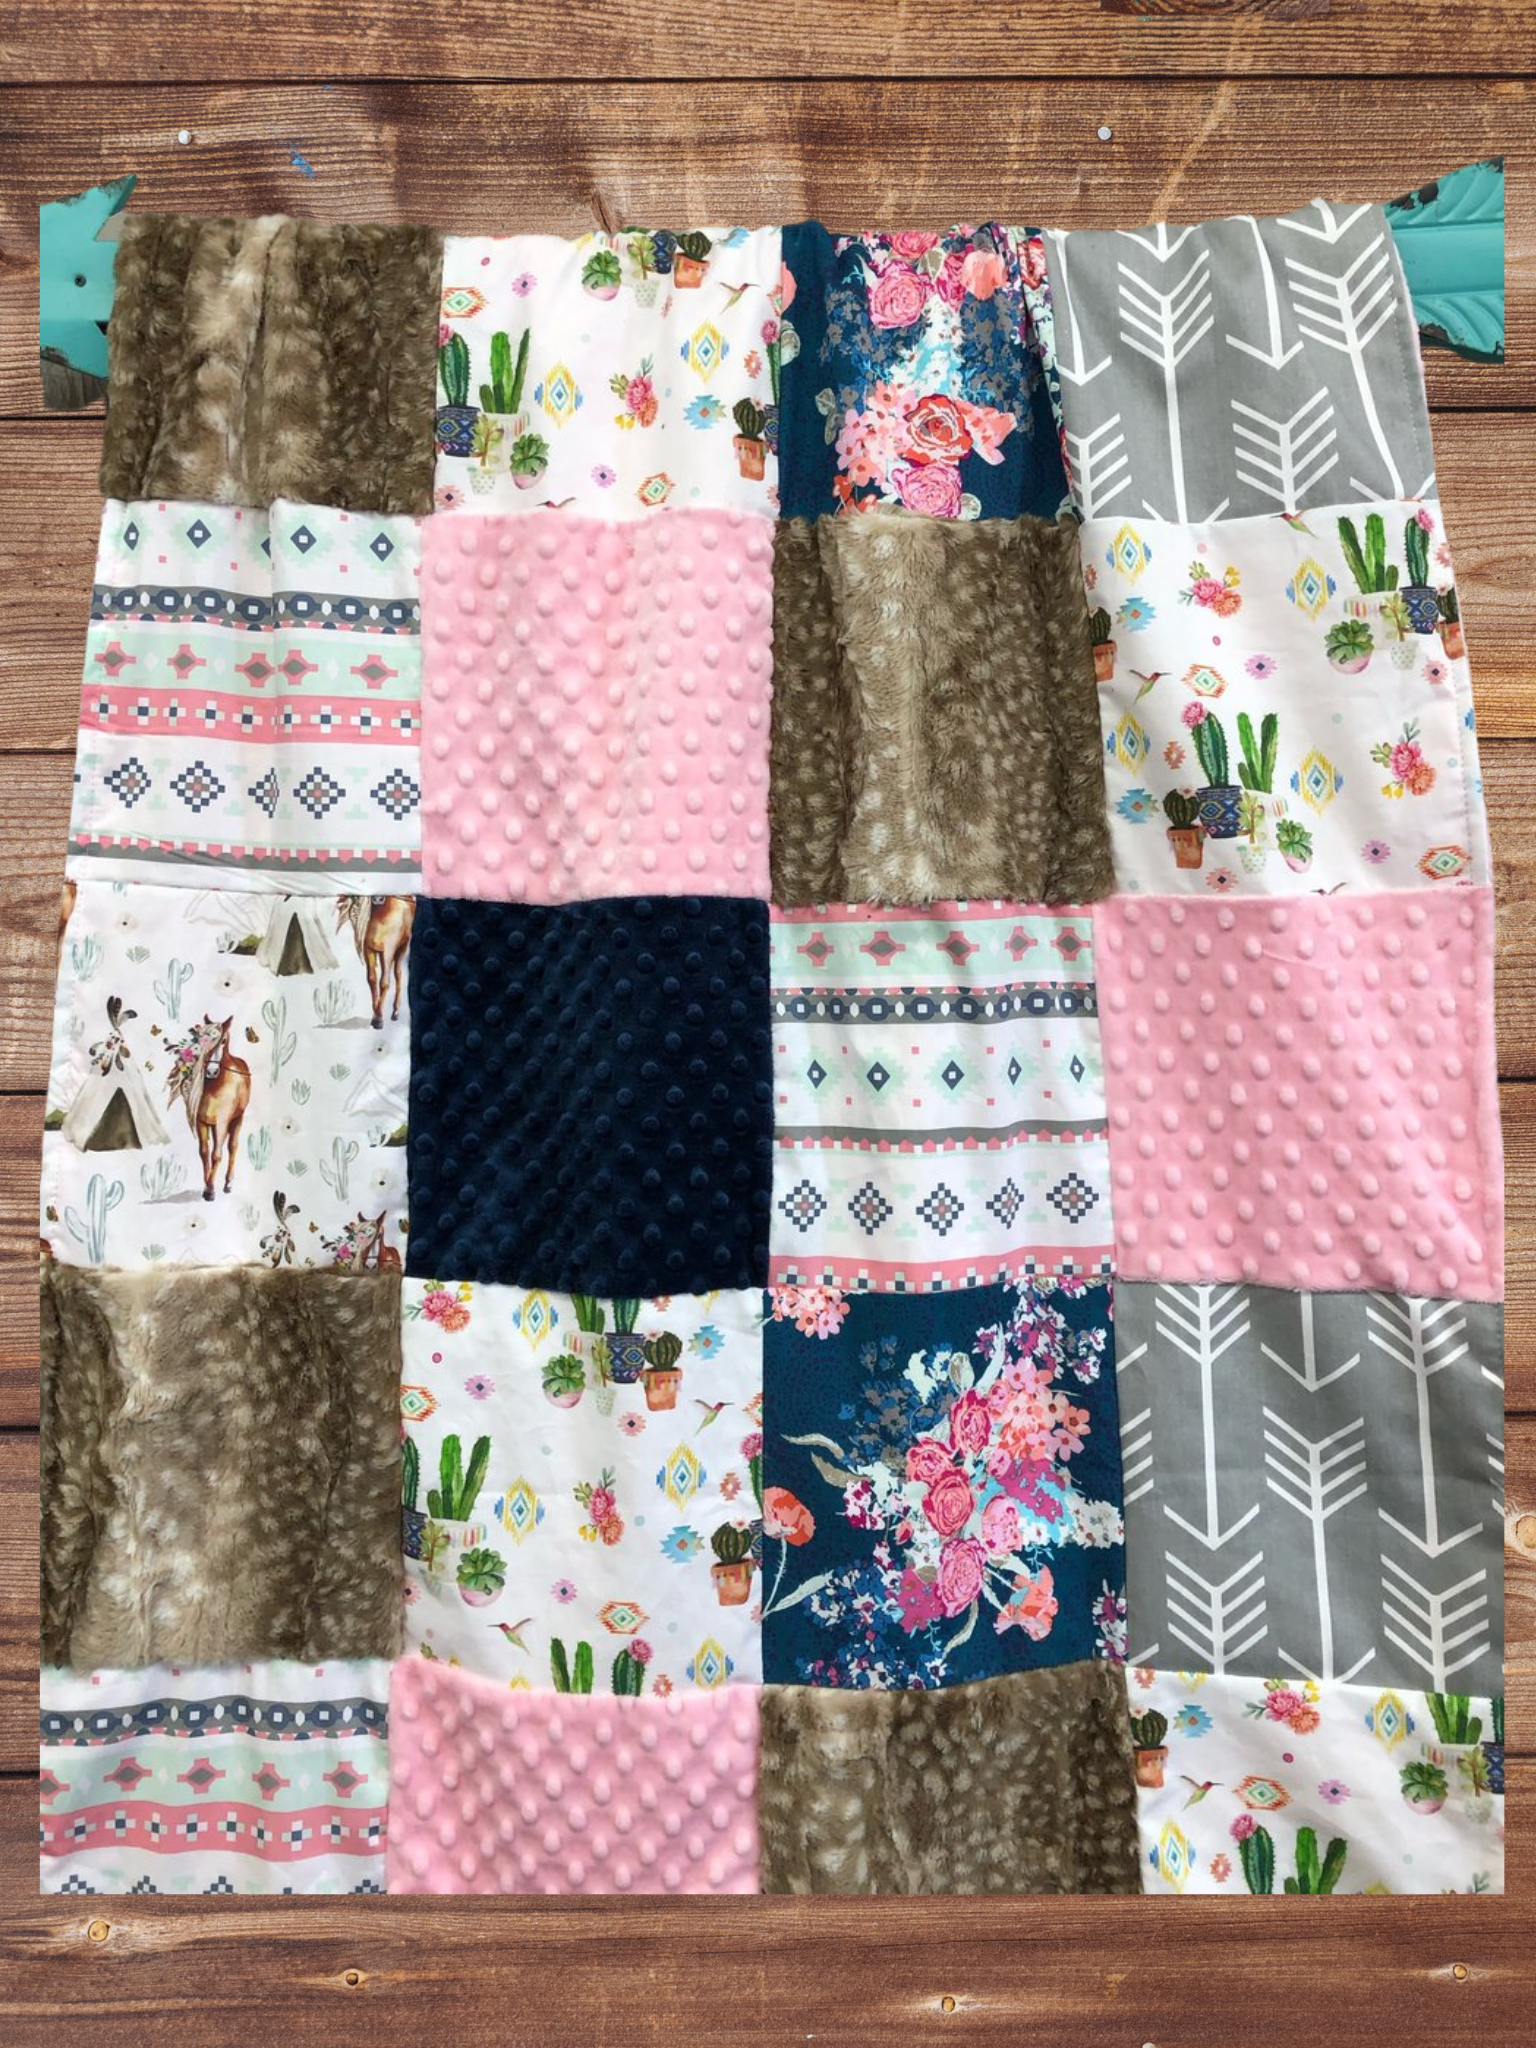 Patchwork Blanket - Boho Horse and Cactus Blanket - DBC Baby Bedding Co 